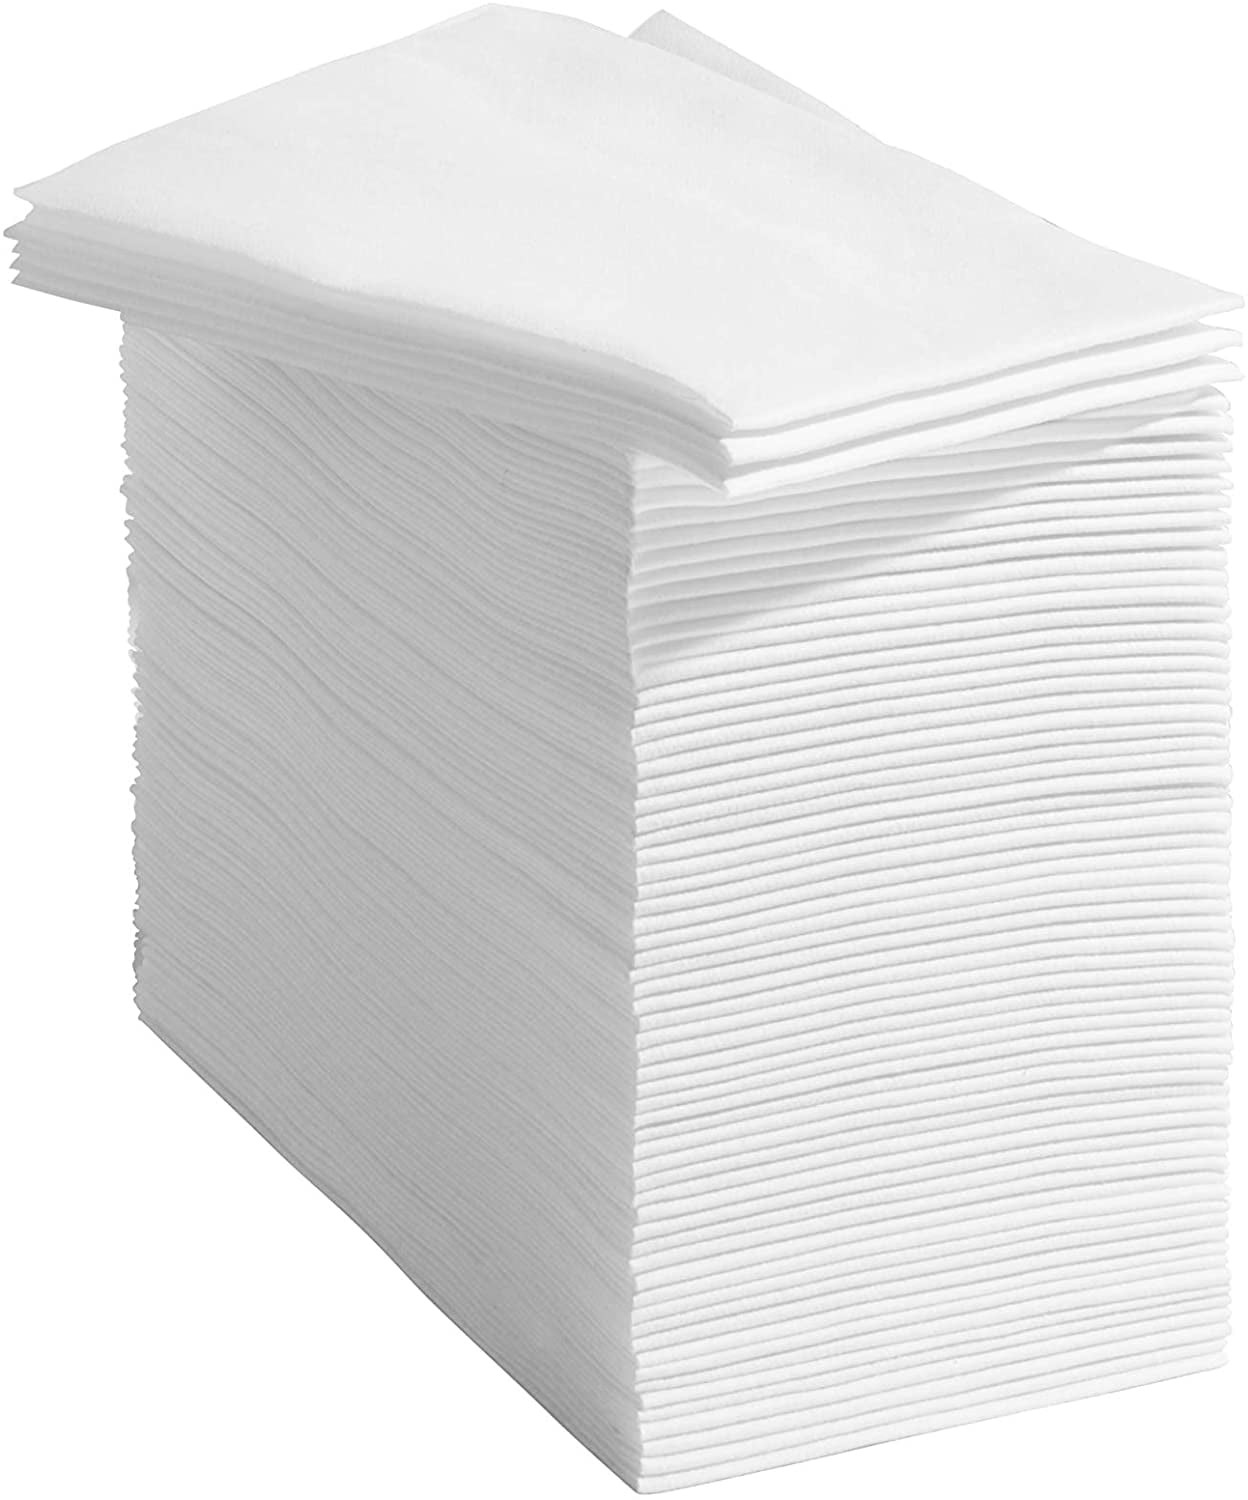 Parties Disposable Paper Hand Towels for Guest Bathroom Disposable Guest Towels Wedding Napkins Dinners Or Events Paper Napkins Weddings 50 Linen Feel Disposable Bathroom Napkins White 